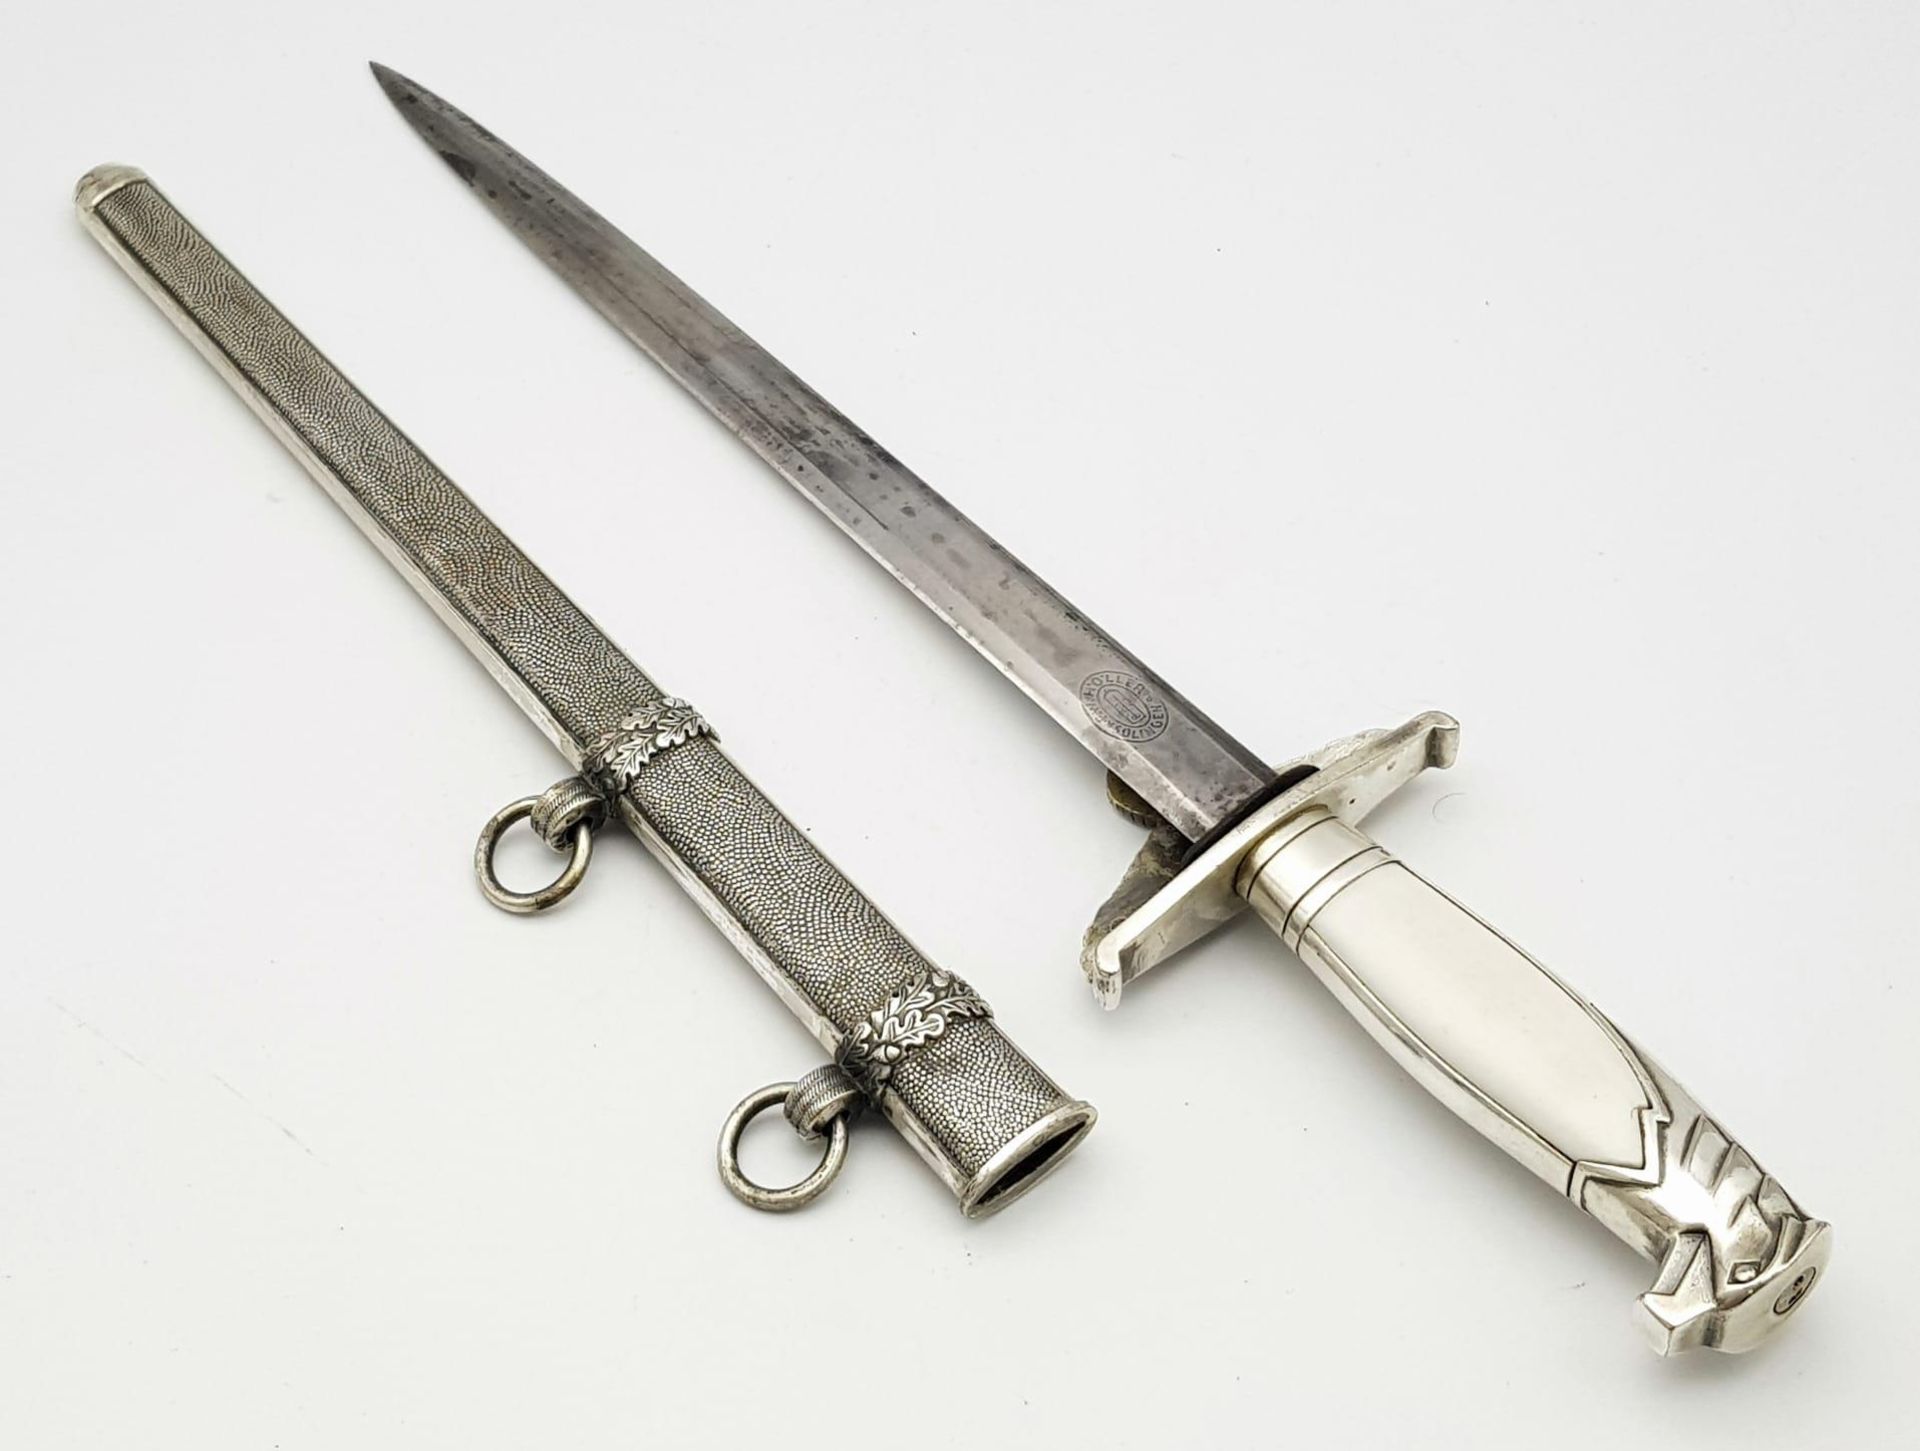 A WW2 German Diplomats Dagger - these stylish daggers had fake mother of pearl handles. This is a - Bild 2 aus 7